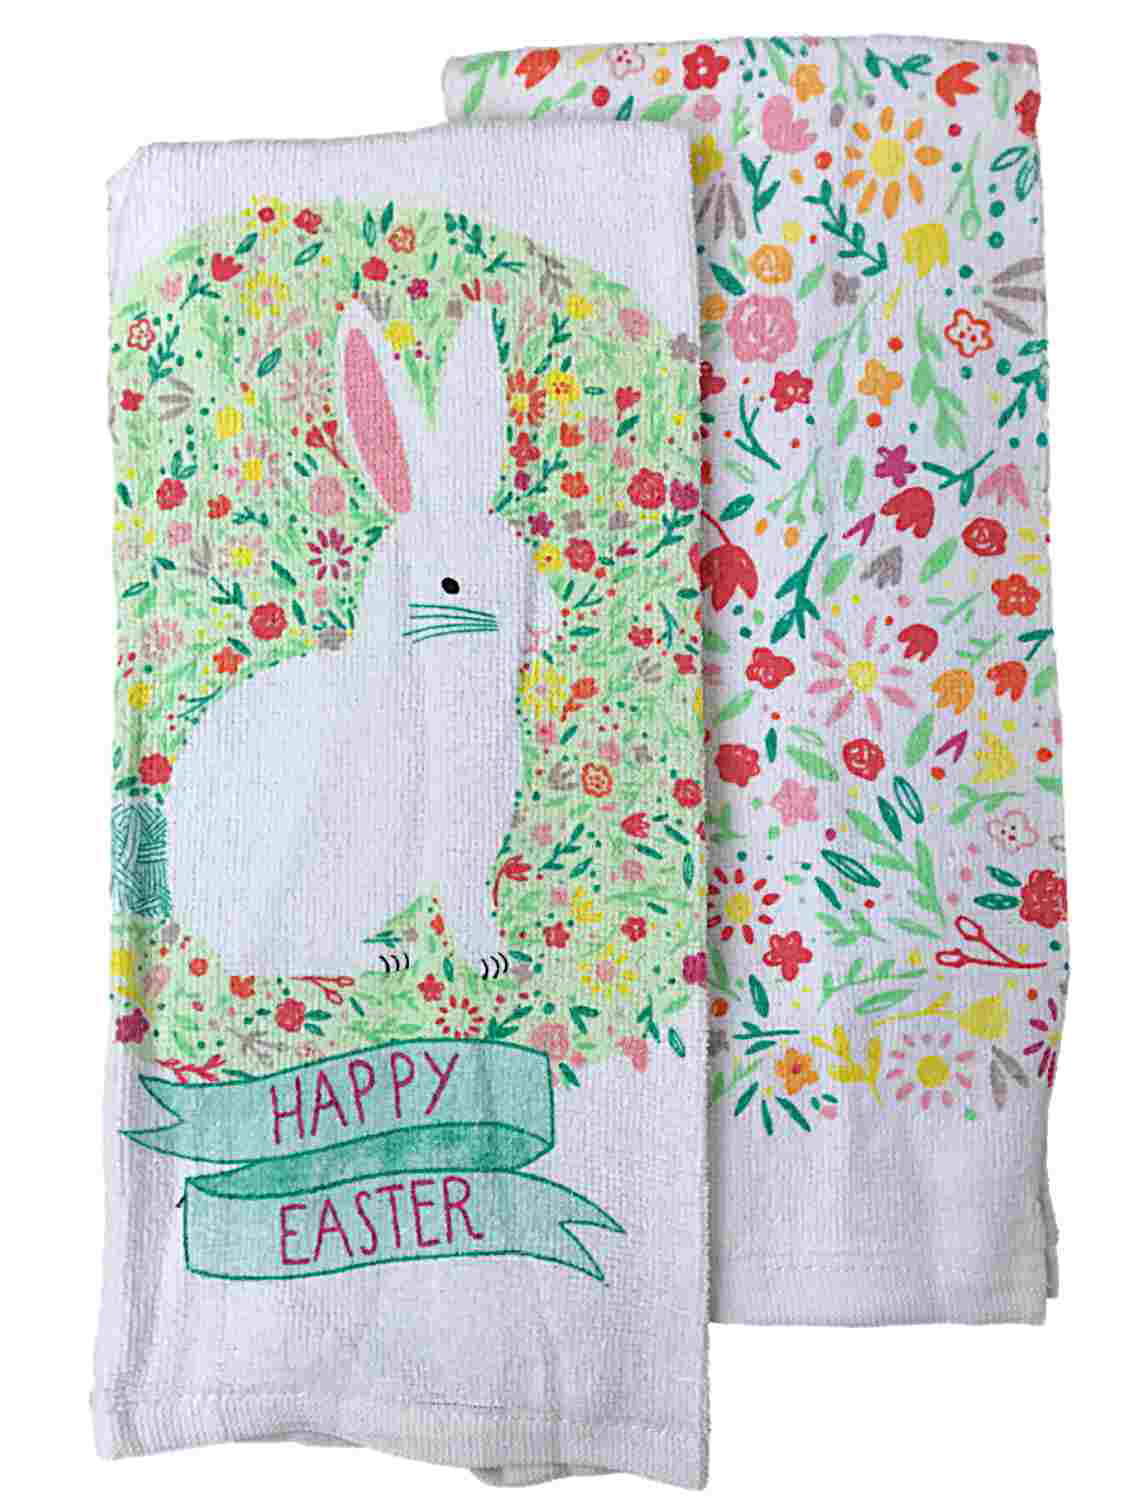 Easter Bunny Tea Towel Mother's Day Kitchen Towels Easter Egg Farmhouse Decor Gift for Her Under 30 Home Decor Aqua Dish Towel Spring Decor